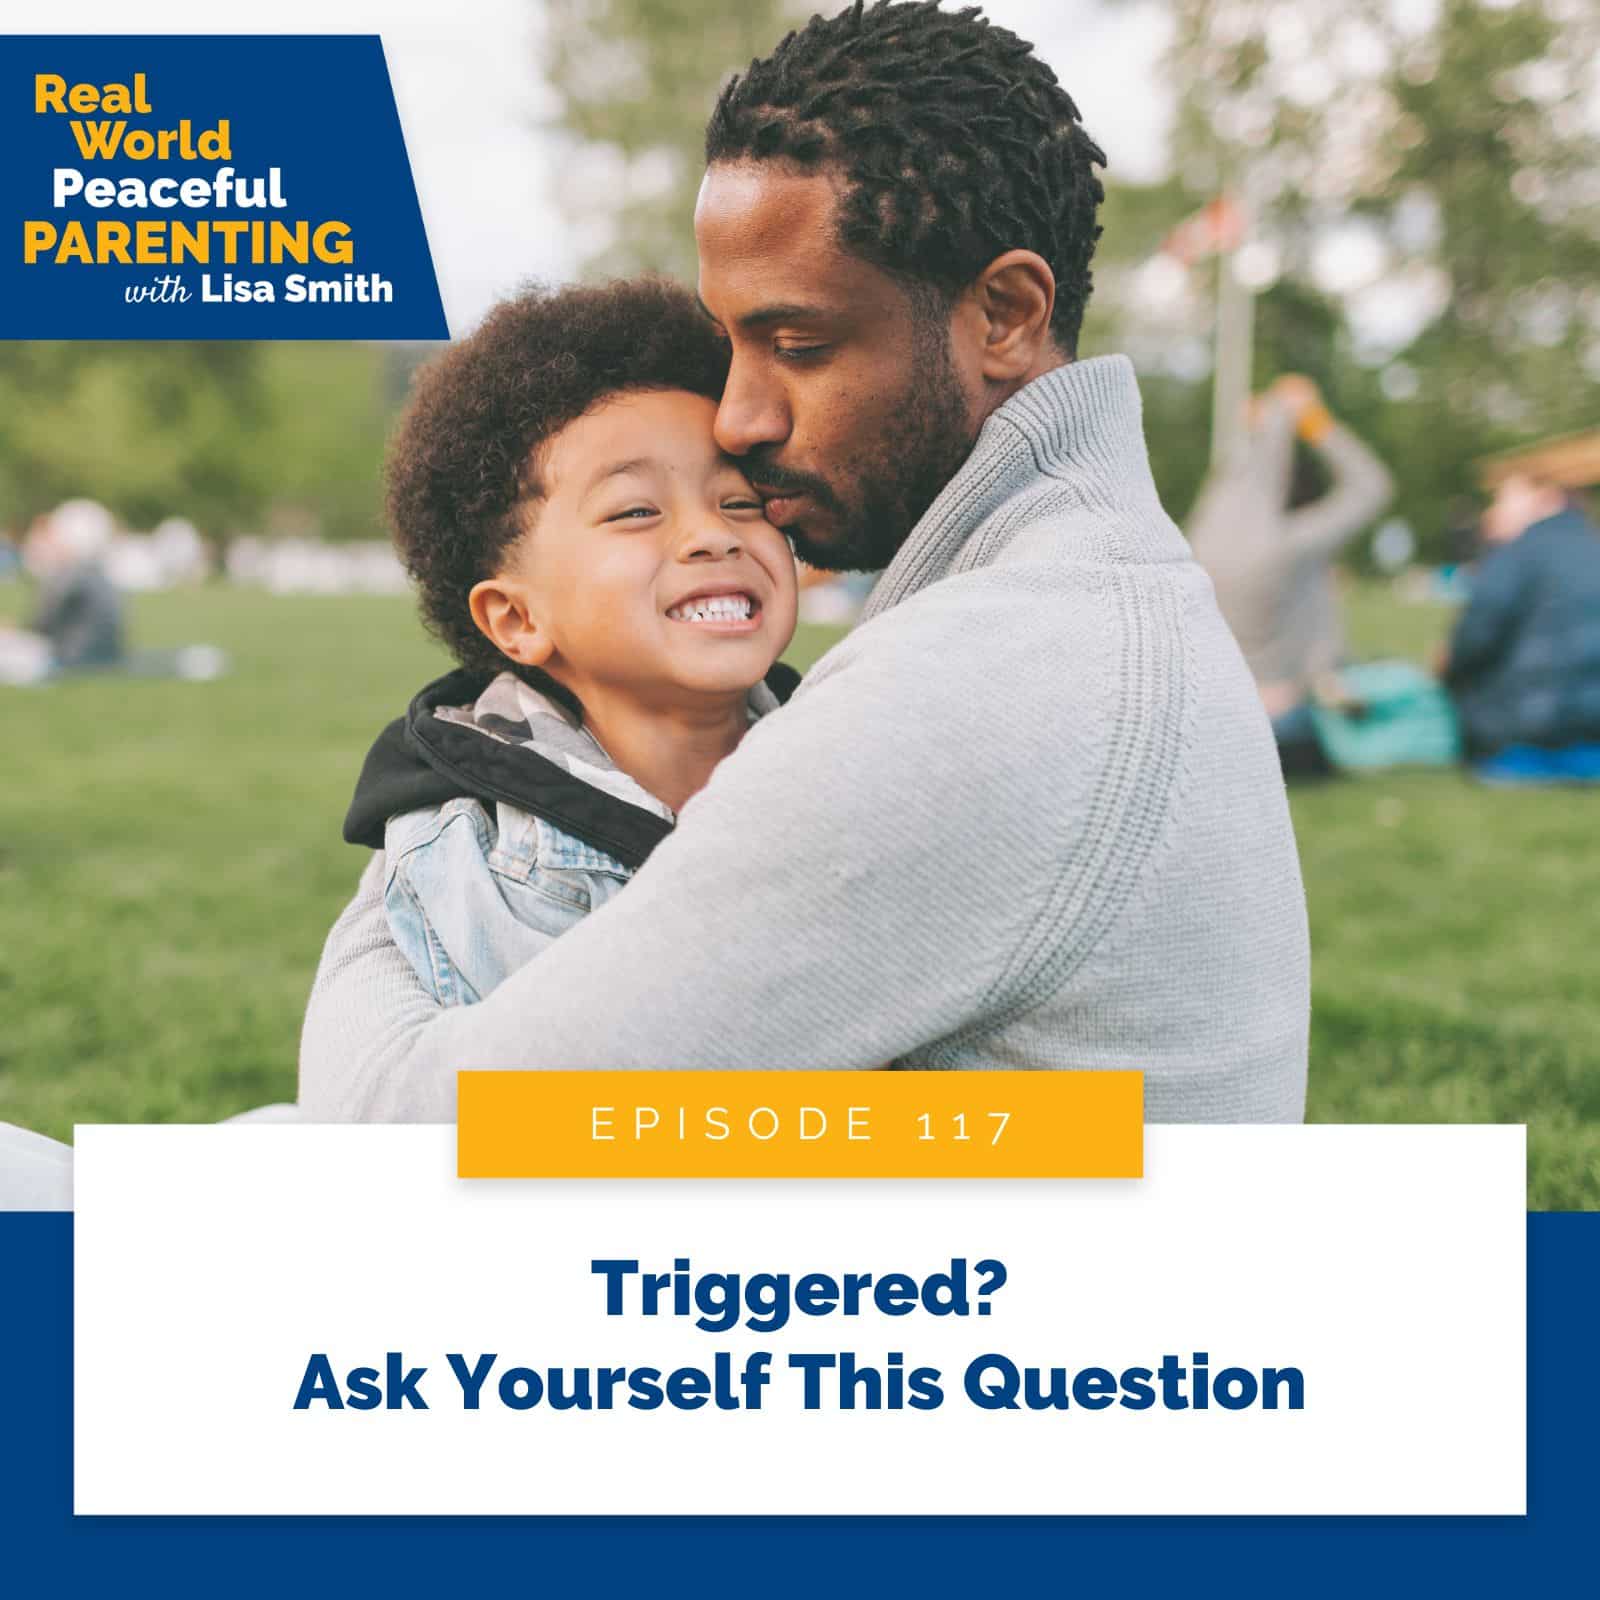 Real World Peaceful Parenting Lisa Smith | Triggered? Ask Yourself This Question